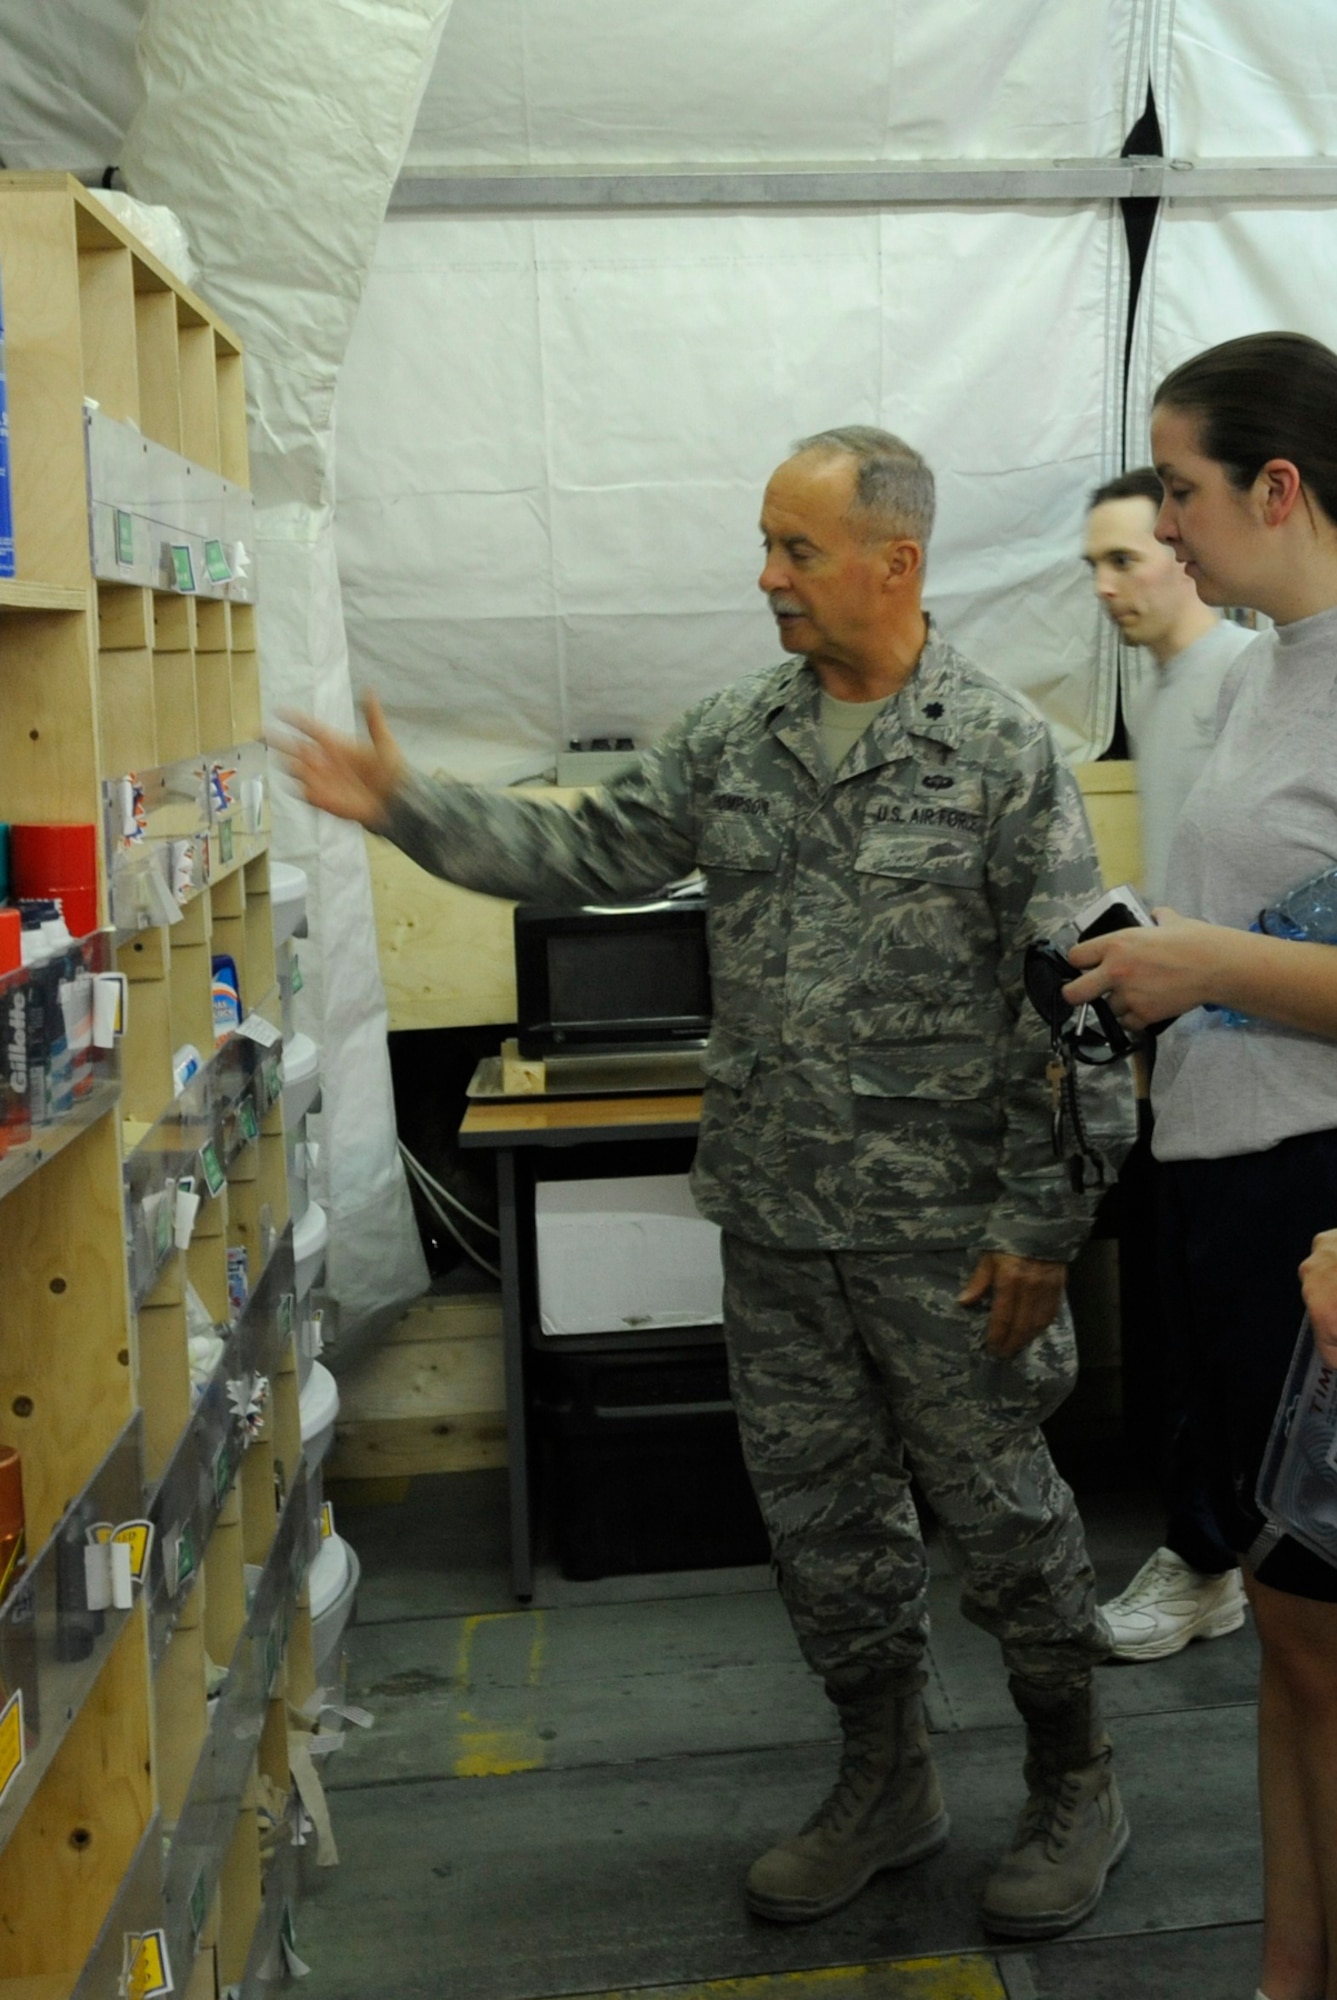 Chaplain (Lt. Col.) Steve Thompson shows guests at the chapel the variety of free hygiene products available to those transiting through or assigned to the Transit Center Aug. 3. The six-person chapel staff hosts 23 services each week, targeted toward four faith groups. Thompson is the 376th Air Expeditionary Wing chaplain. He is deployed here from the Florida Air National Guard’s 125th Fighter Wing. (U.S. Air Force photo/Tech. Sgt. Tammie Moore)